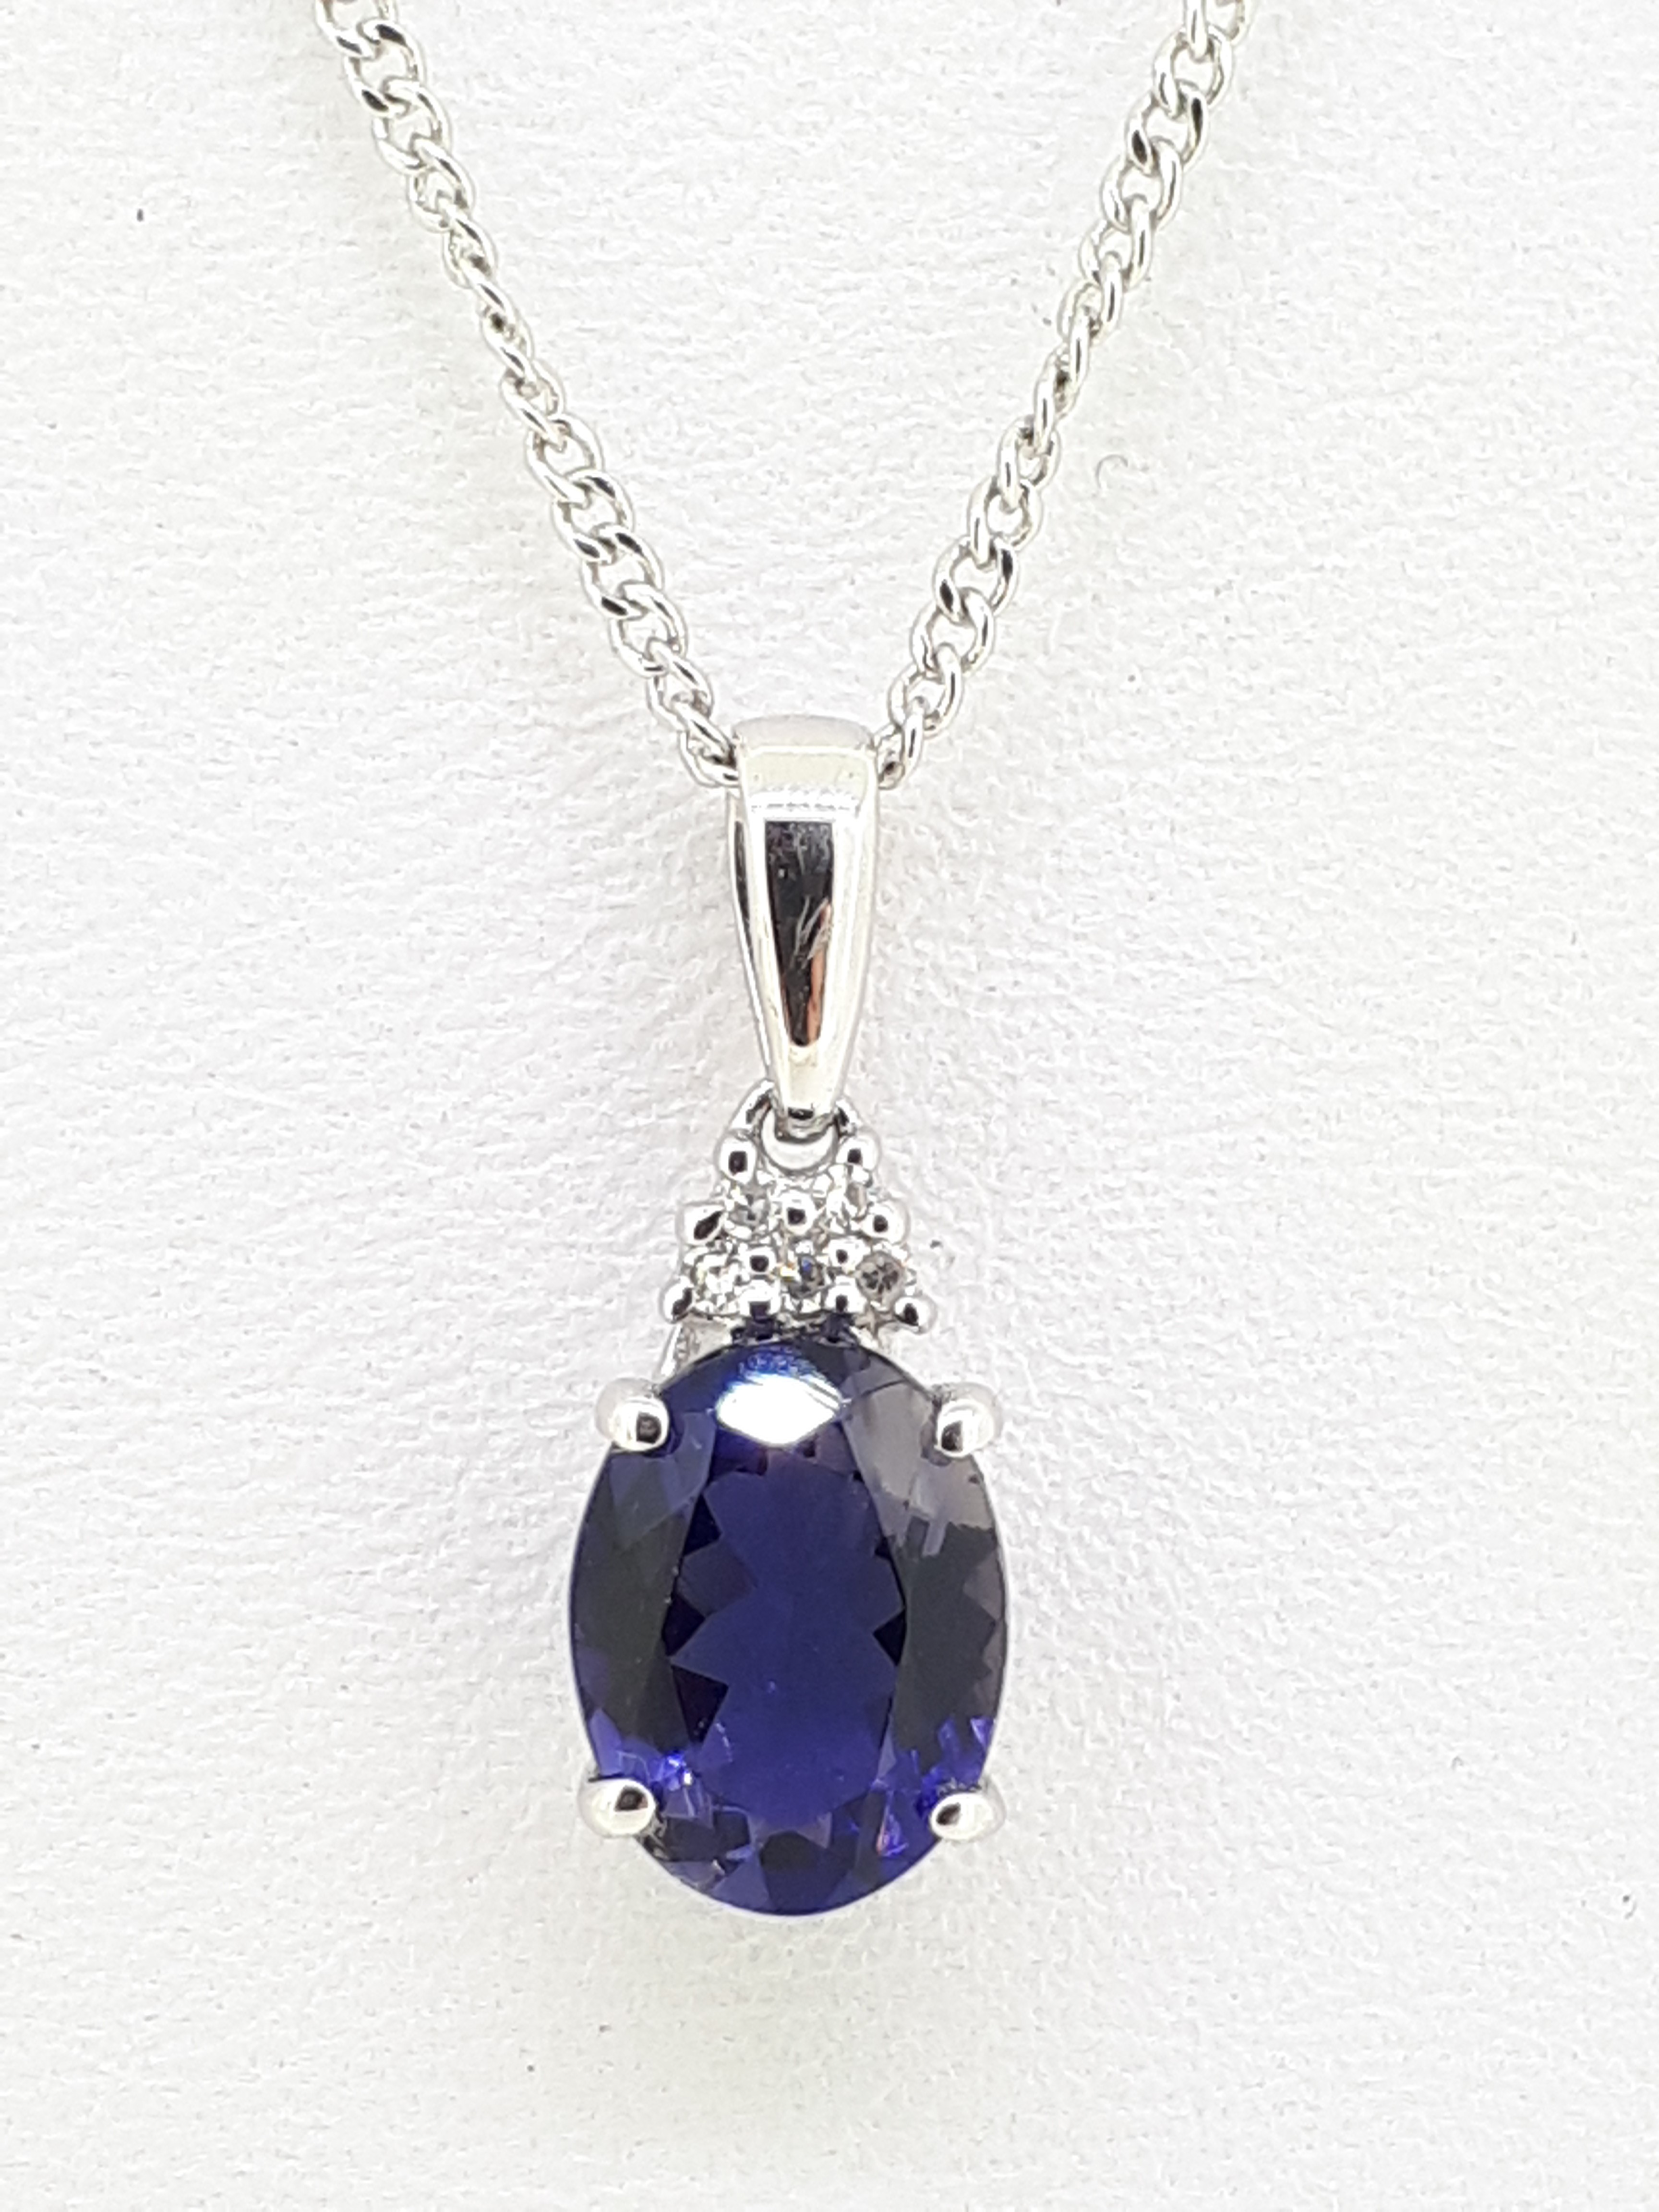 9ct (375) White Gold Diamond & Iolite Pendant on a Twisted Curb Chain - Image 5 of 5